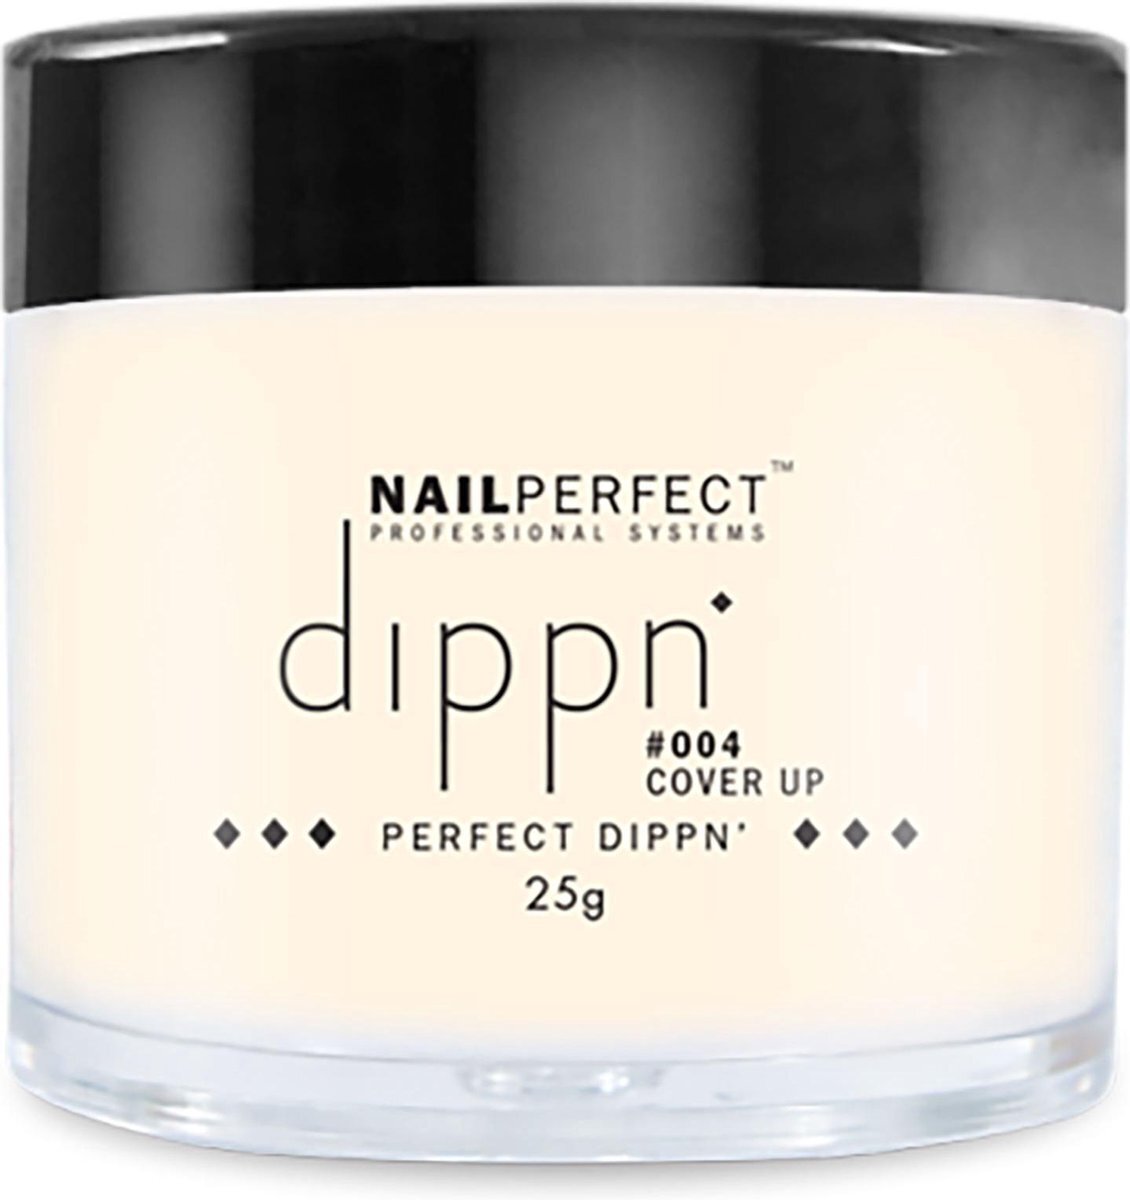 Nailperfect Nail Perfect Acrylic #004 Cover up 25gr